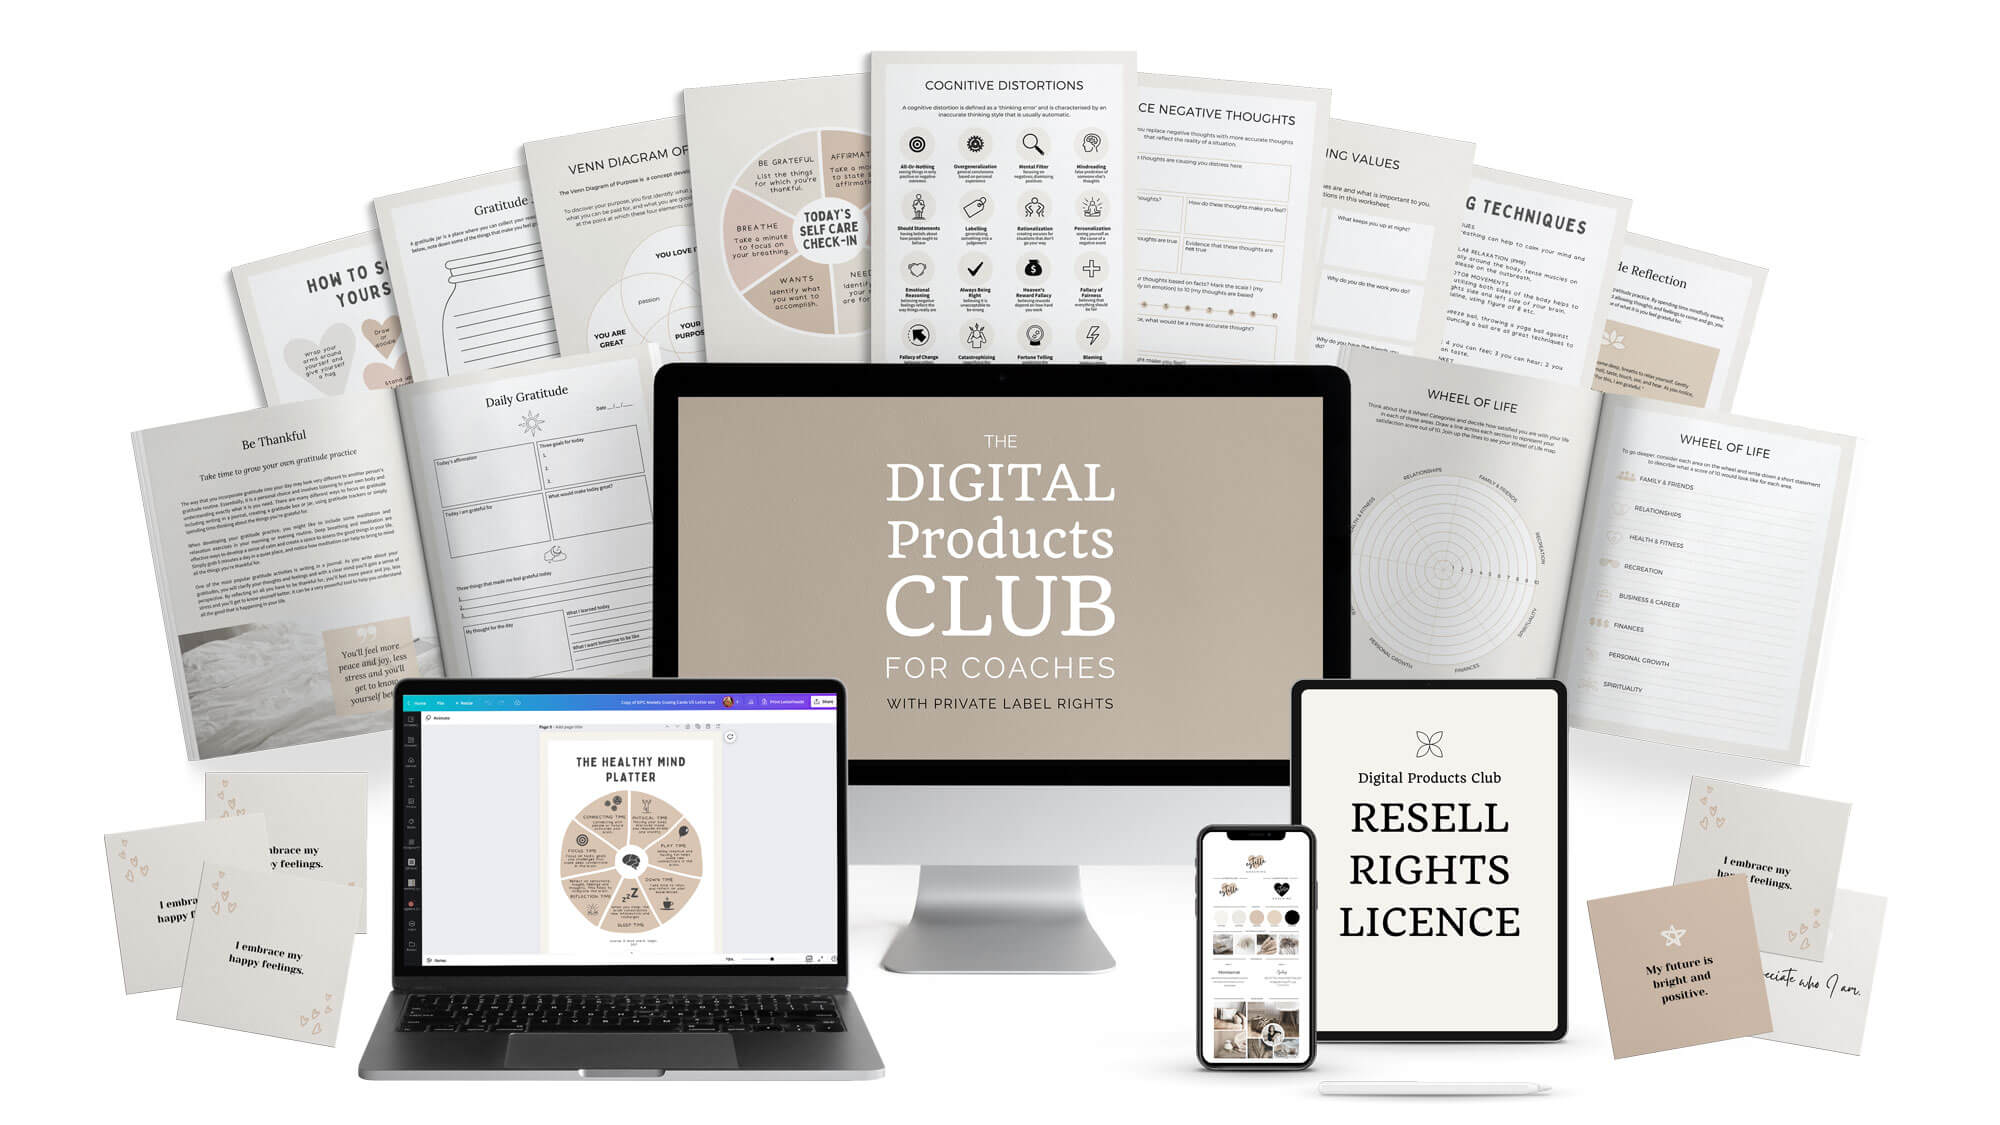 digital products for coaches, canva templates for coaches, coaching canva templates, private label rights